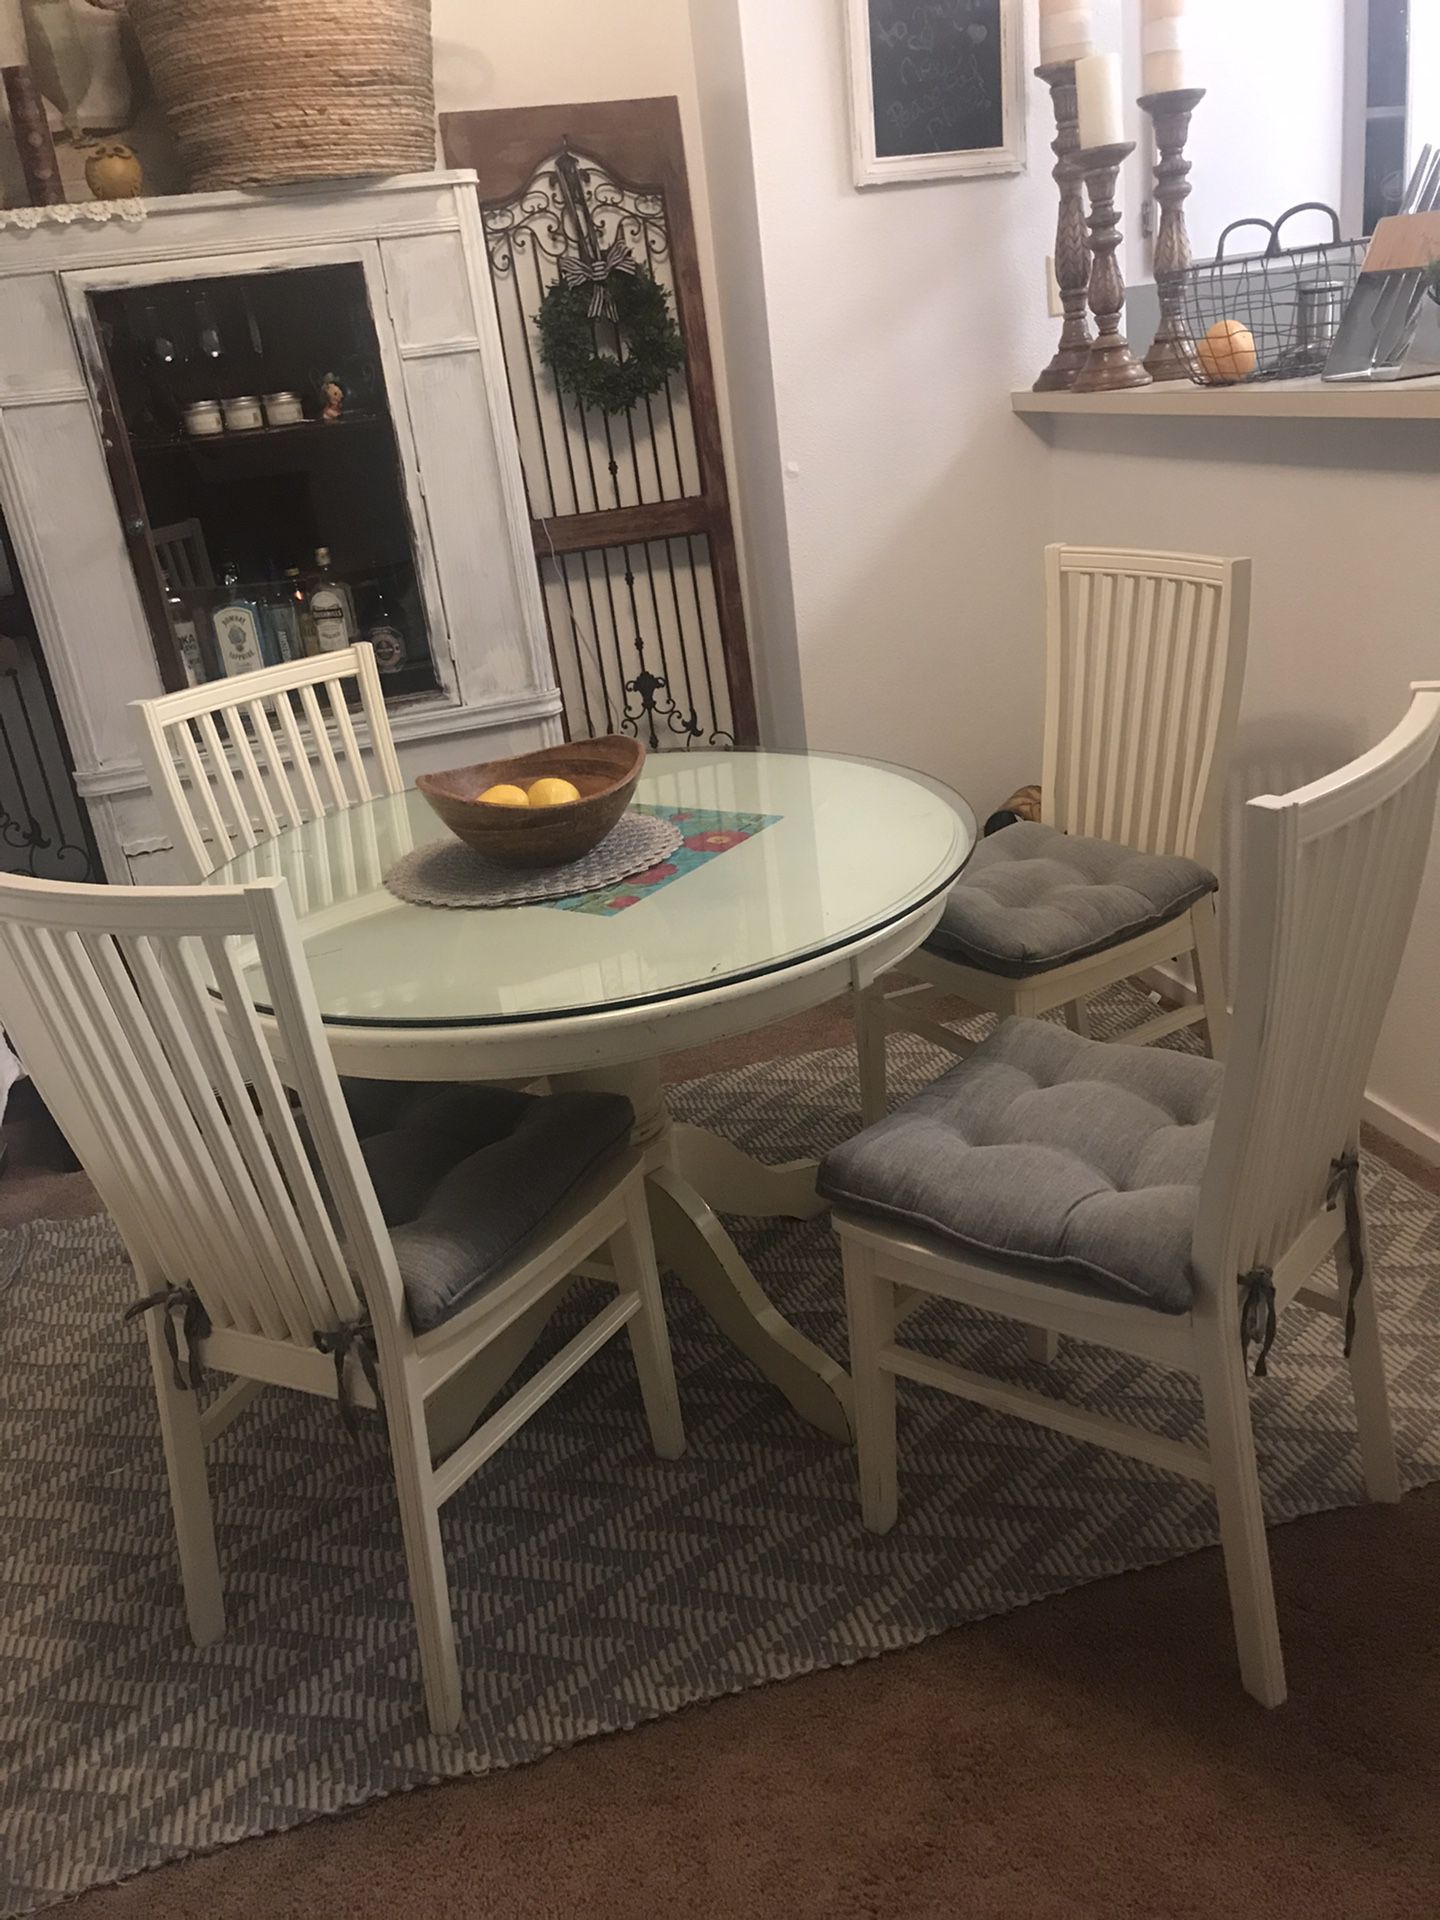 Dinner table with 4 chairs. (From 1 Pier Imports)